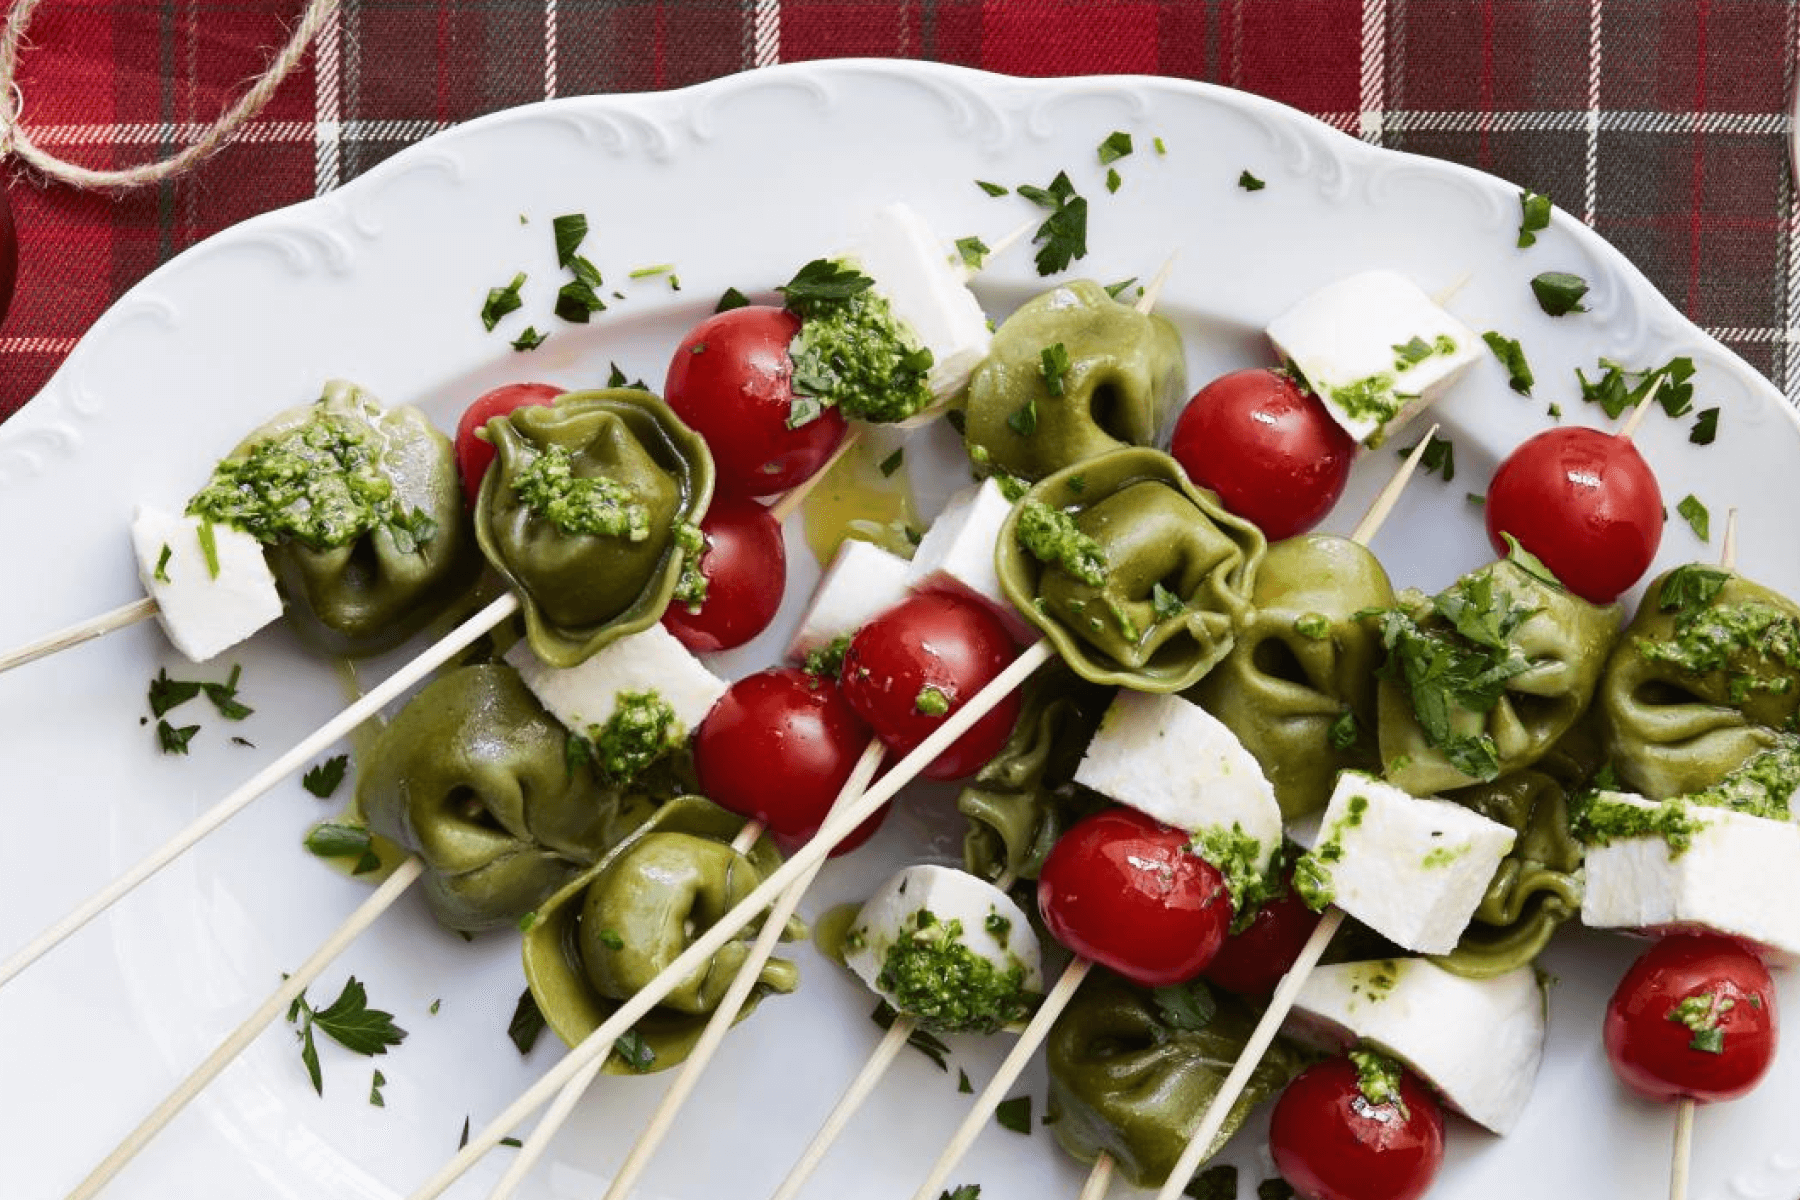 Skewers with green tortellini, red cherry tomatoes, and cubes of white cheese sprinkled with pesto.